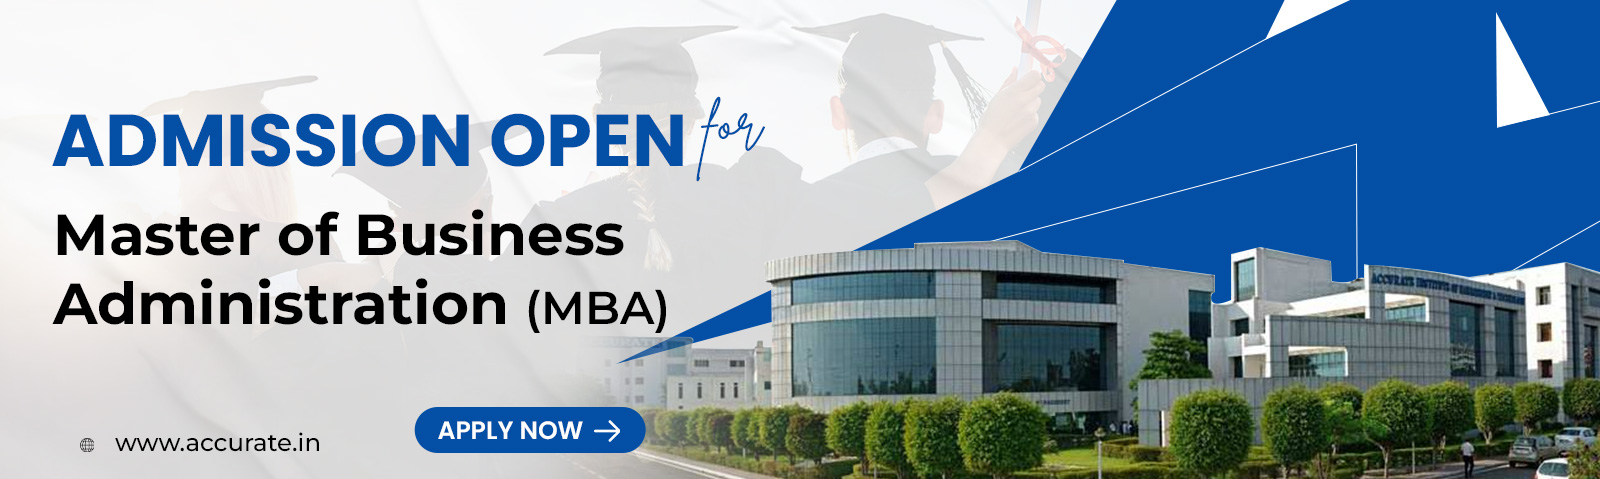 Apply Now for MBA Admission